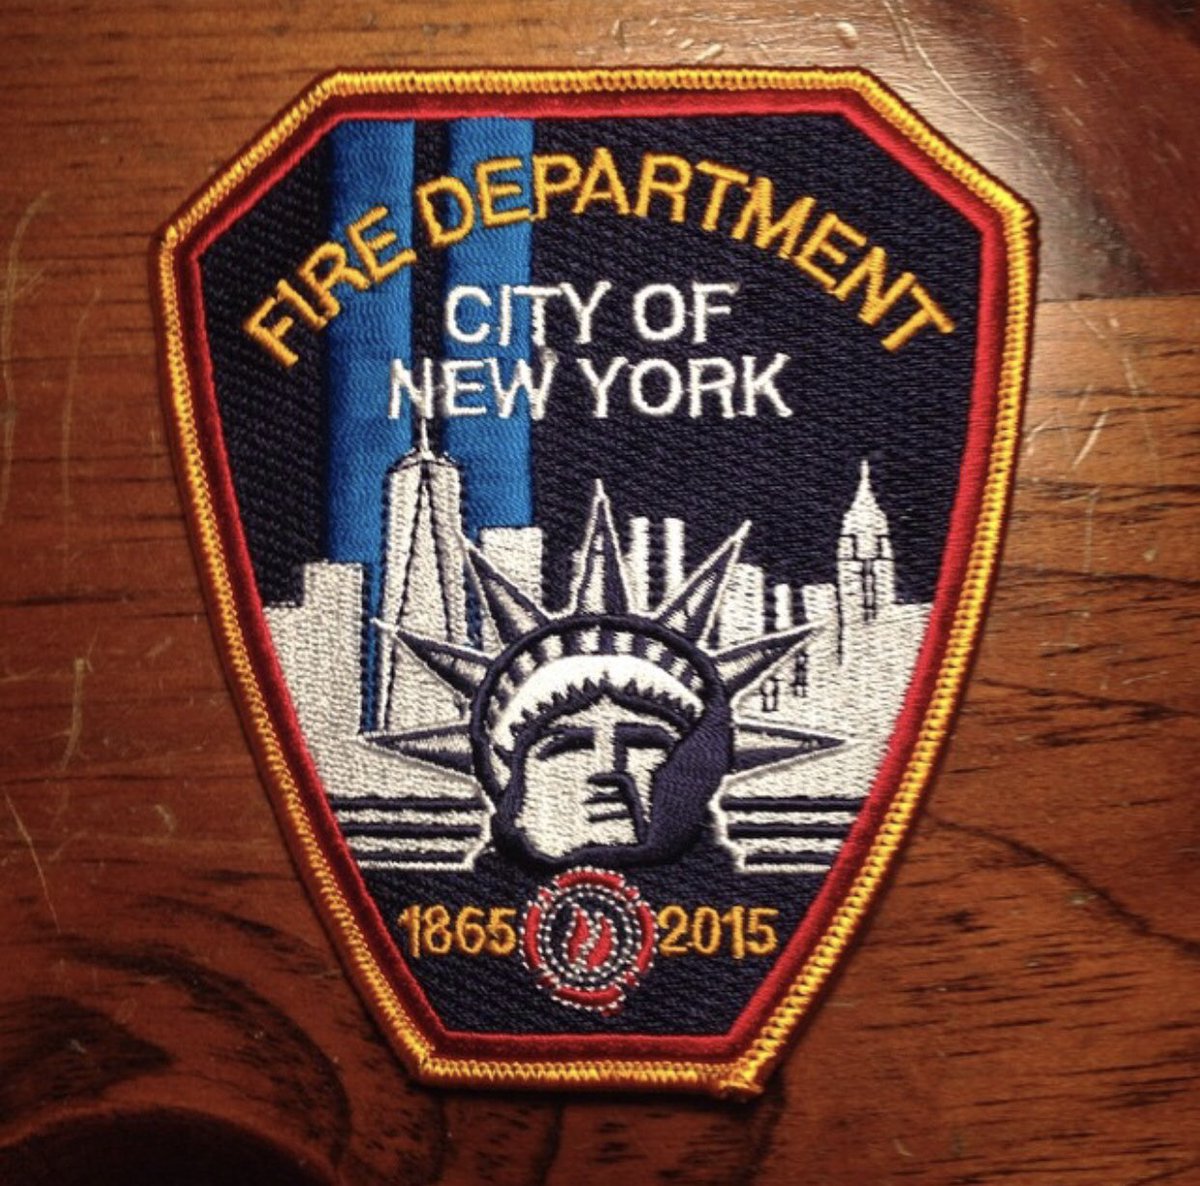 The people have spoken and I respect the democratic process, so here is the beginning of my  #FDNY patch thread. First up is the FDNY 150th Anniversary patch. I believe these were a limited run, fortunately I managed to snag a few.